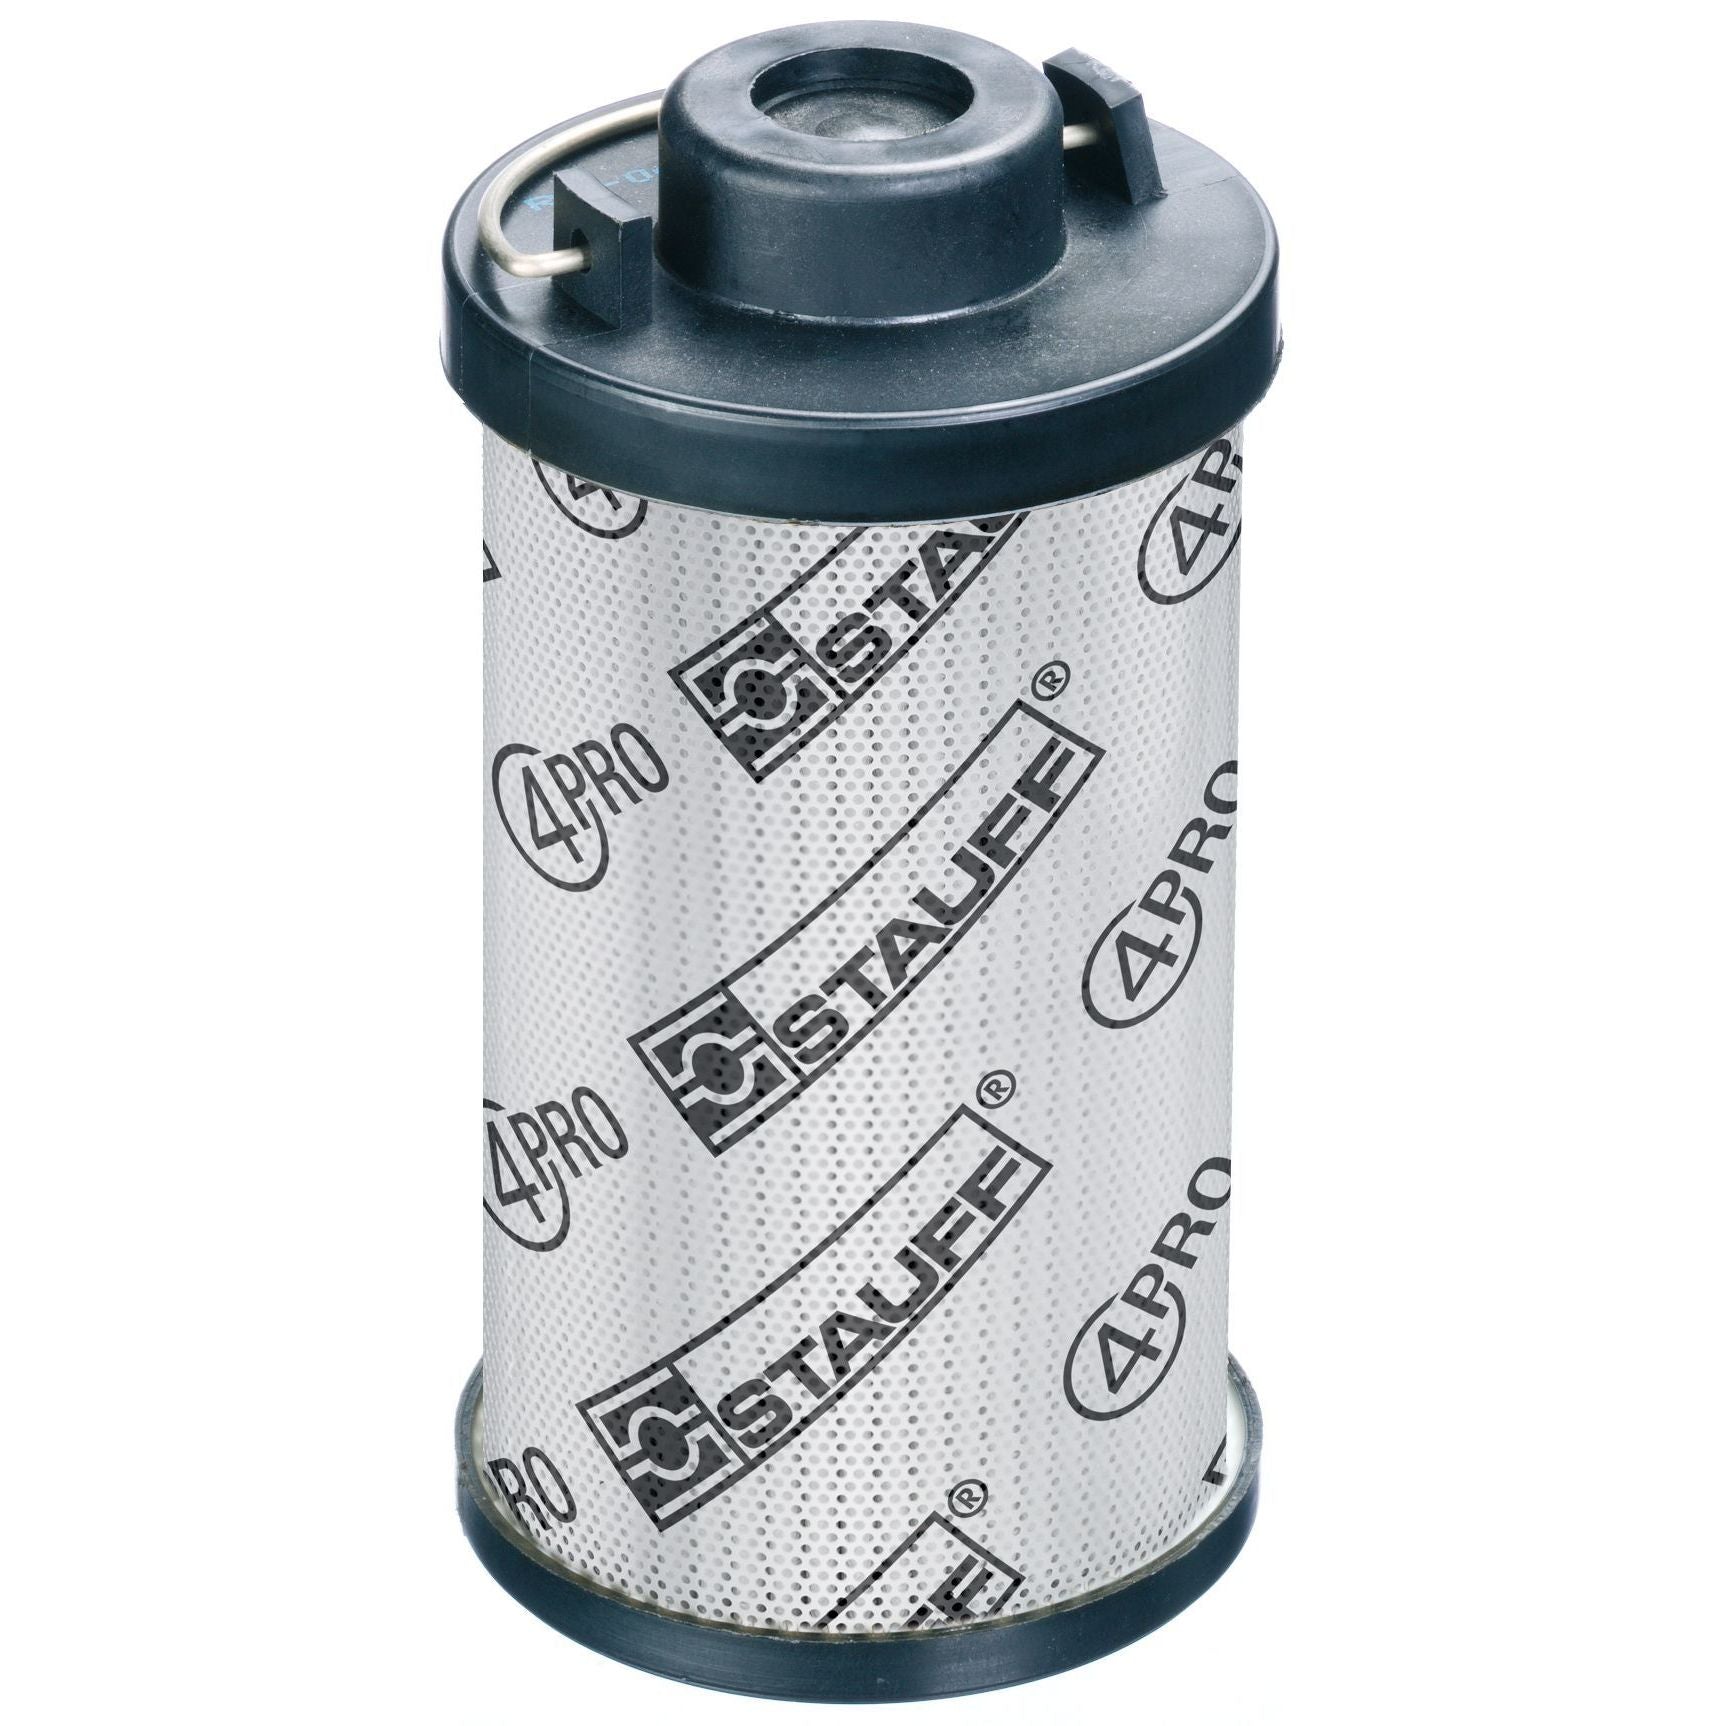 RE-030-A-03-B-B3/3 : Stauff RF-030 Series Filter Element, 20 Micron, Stainless Fiber Media, 435psi Collapse Differential, Buna